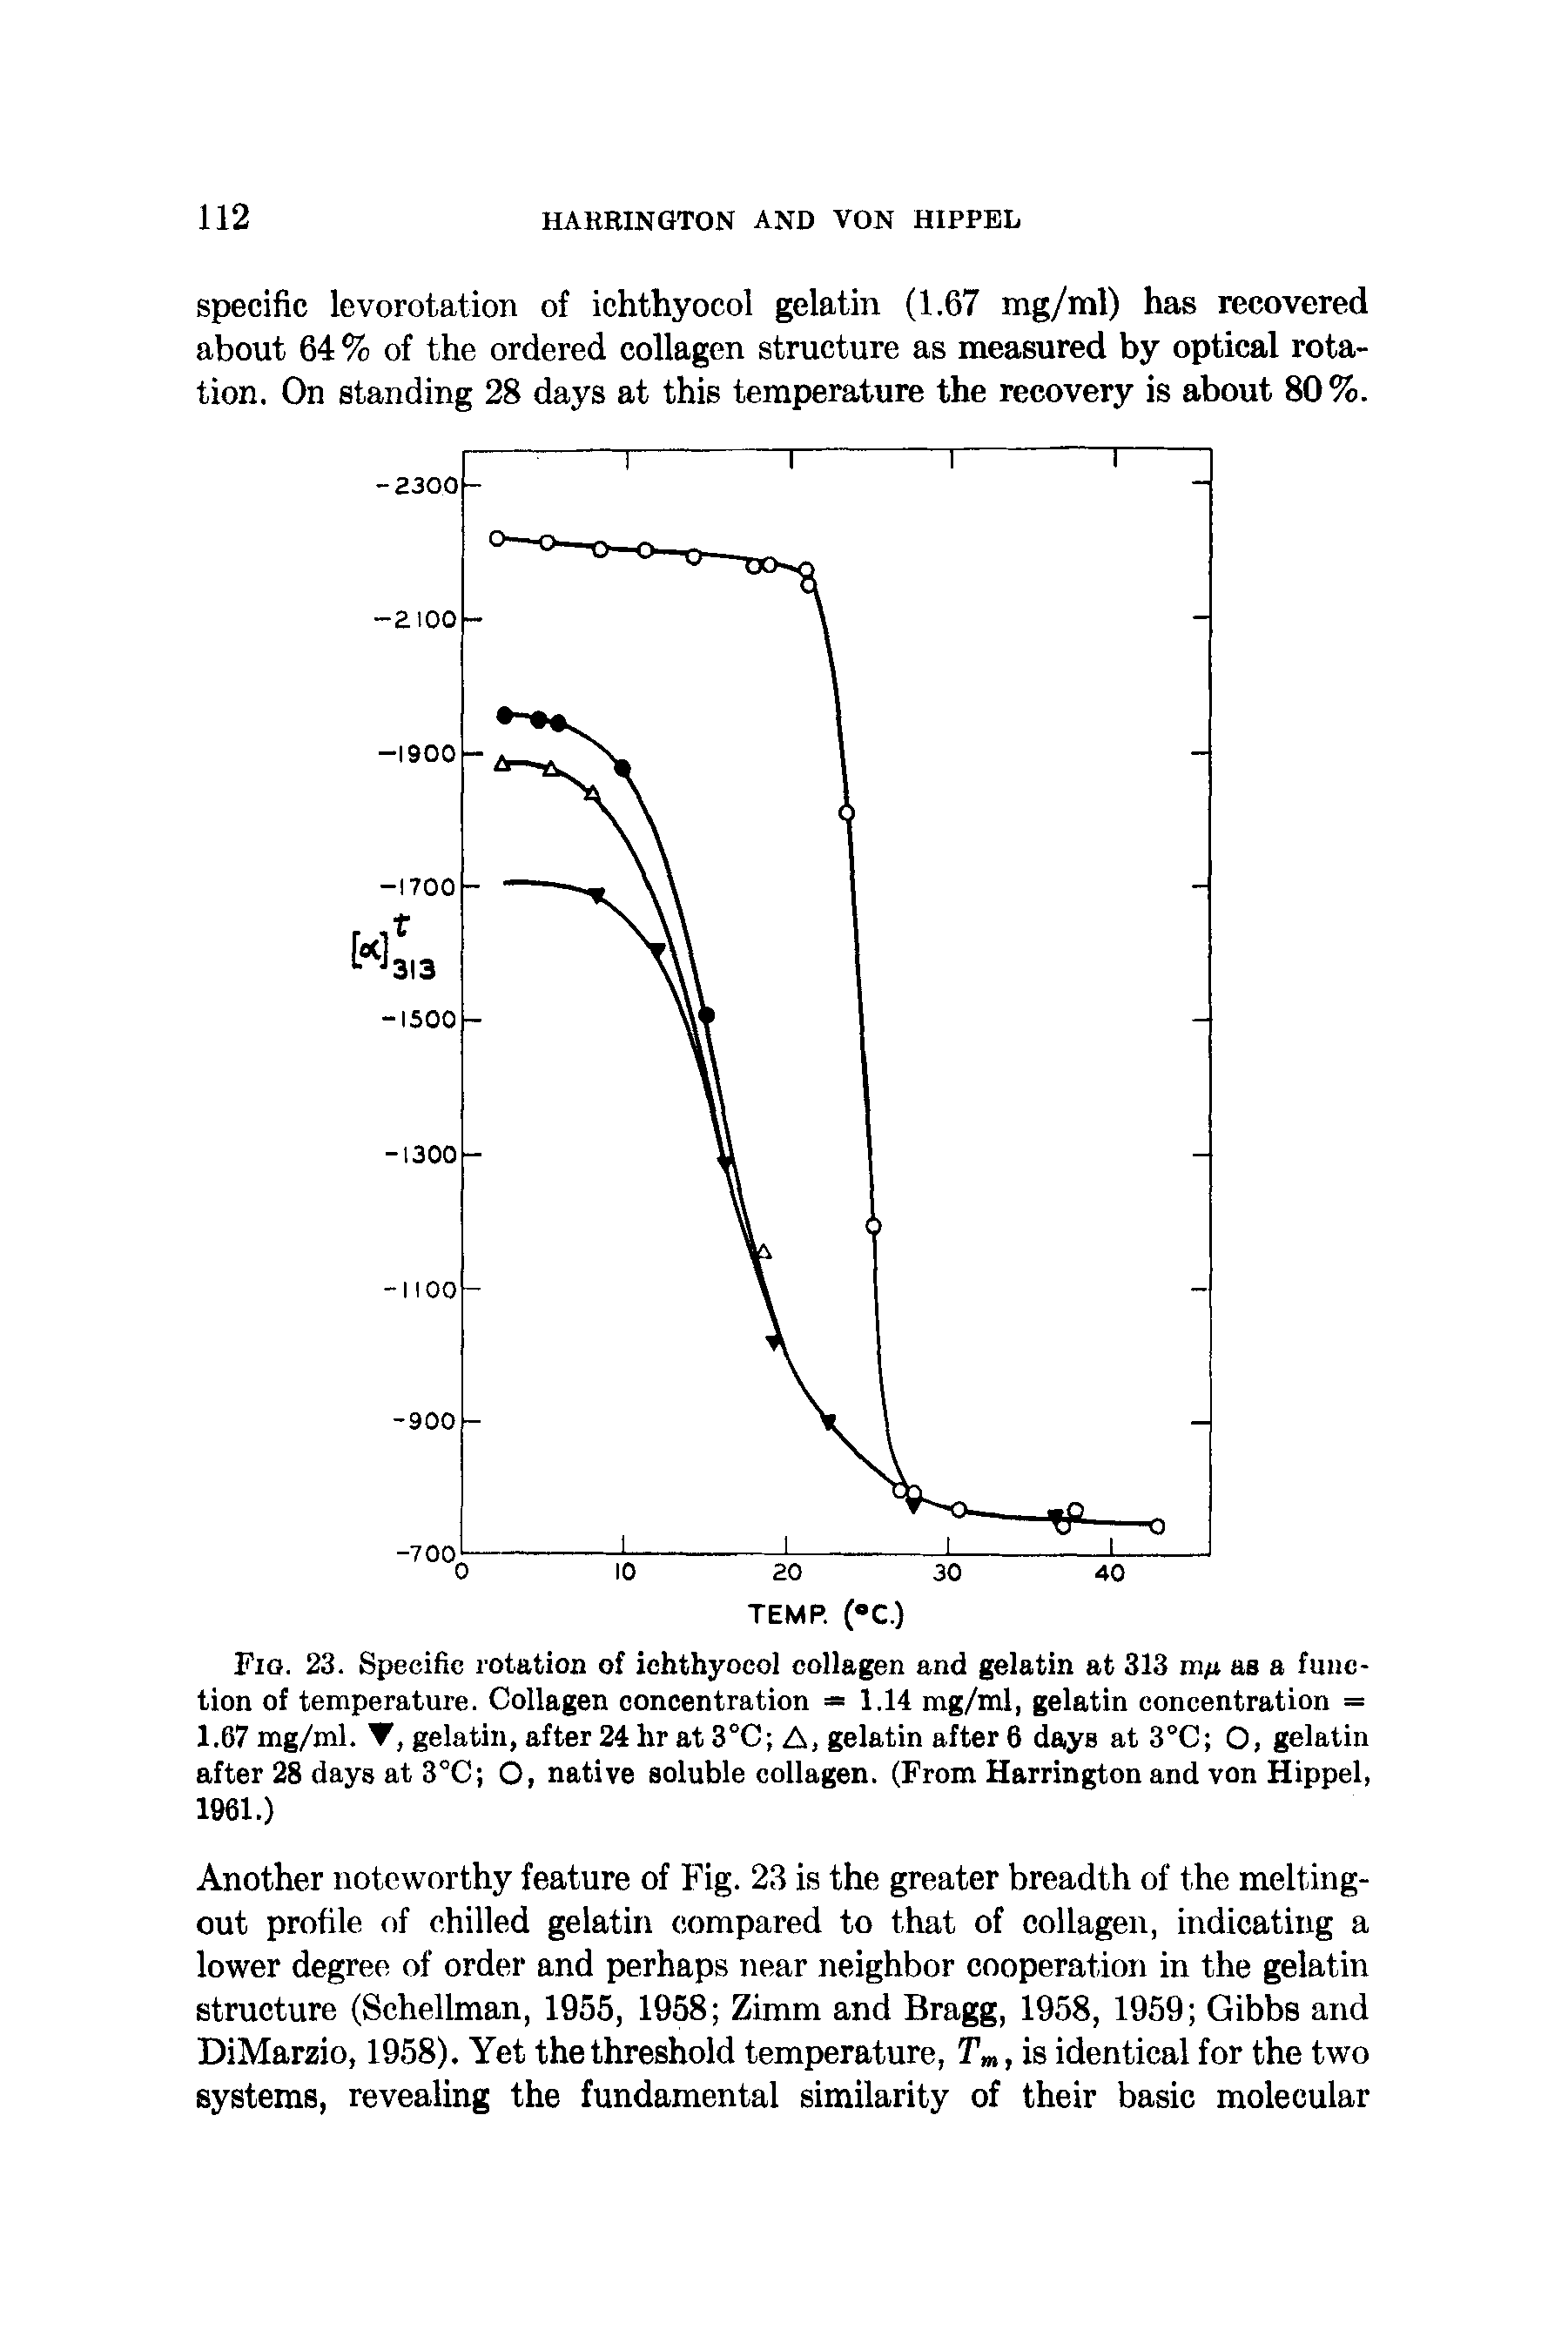 Fig. 23. Specific rotation of ichthyocol collagen and gelatin at 313 wn as a function of temperature. Collagen concentration = 1.14 mg/ml, gelatin concentration = 1.67 mg/ml. T, gelatin, after 24 hr at 3°C A, gelatin after 6 days at 3°C O, gelatin after 28 days at 3°C O, native soluble collagen. (From Harrington and von Hippel, 1961.)...